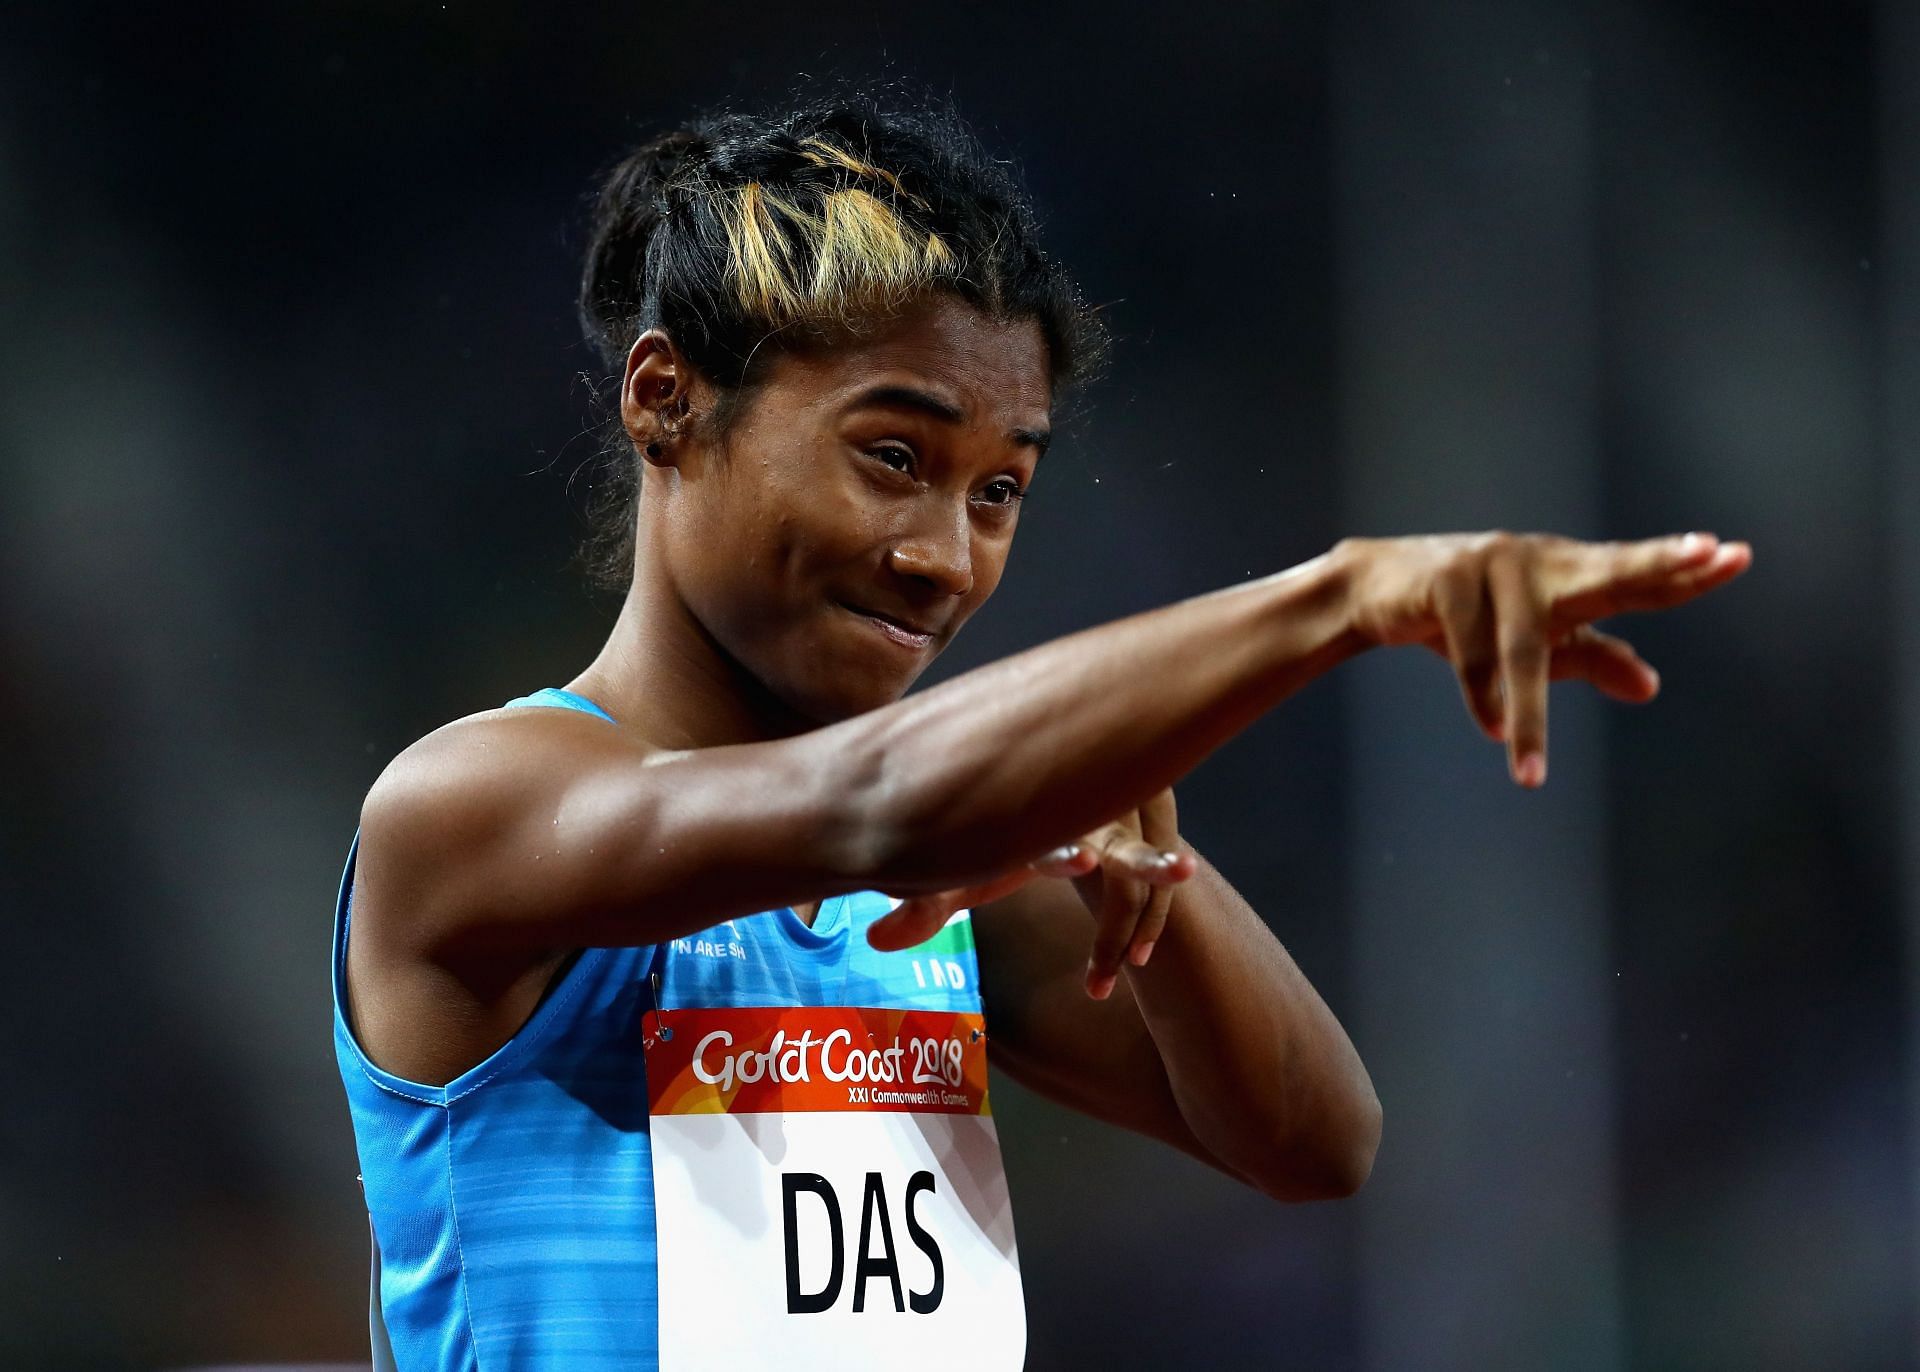 Athletics - Commonwealth Games Day 6 (Image courtesy: Getty Images)